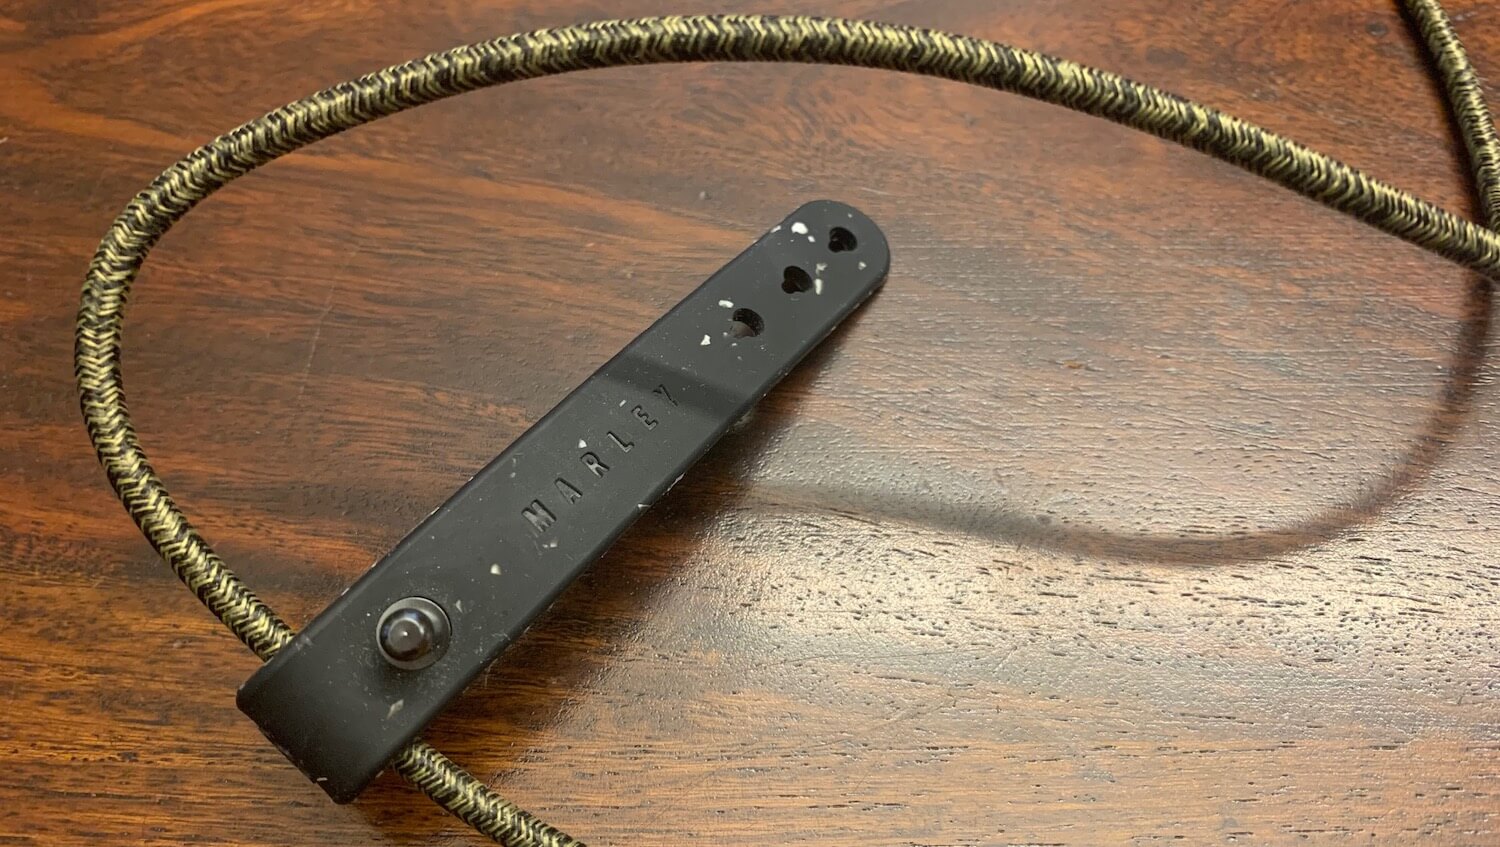 House of Marley charging cable wrap undone